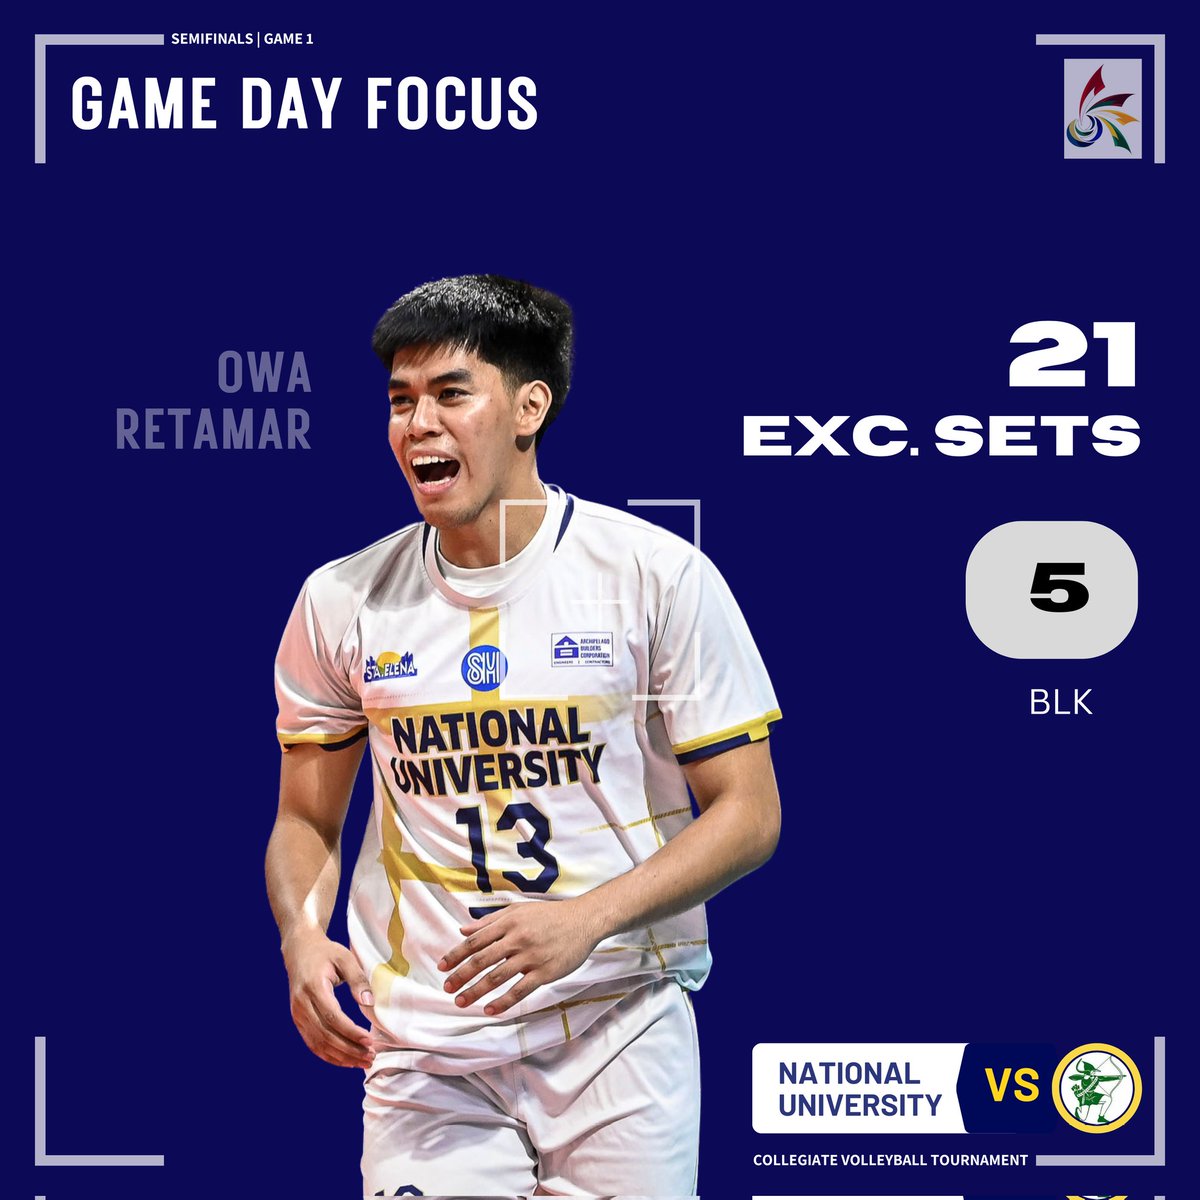 FINALS-BOUND! ✈️💛💙

The NU Bulldogs are back to the UAAP Finals after dominating DLSU, 25-23, 22-25, 25-22, 25-21, today at the SMART Araneta Coliseum.

Player of the Game: Owa Retamar
21 Excellent Sets + 5 Blocks

📷: UAAP Media Bureau 
#GoBulldogs #UAAPSeason86